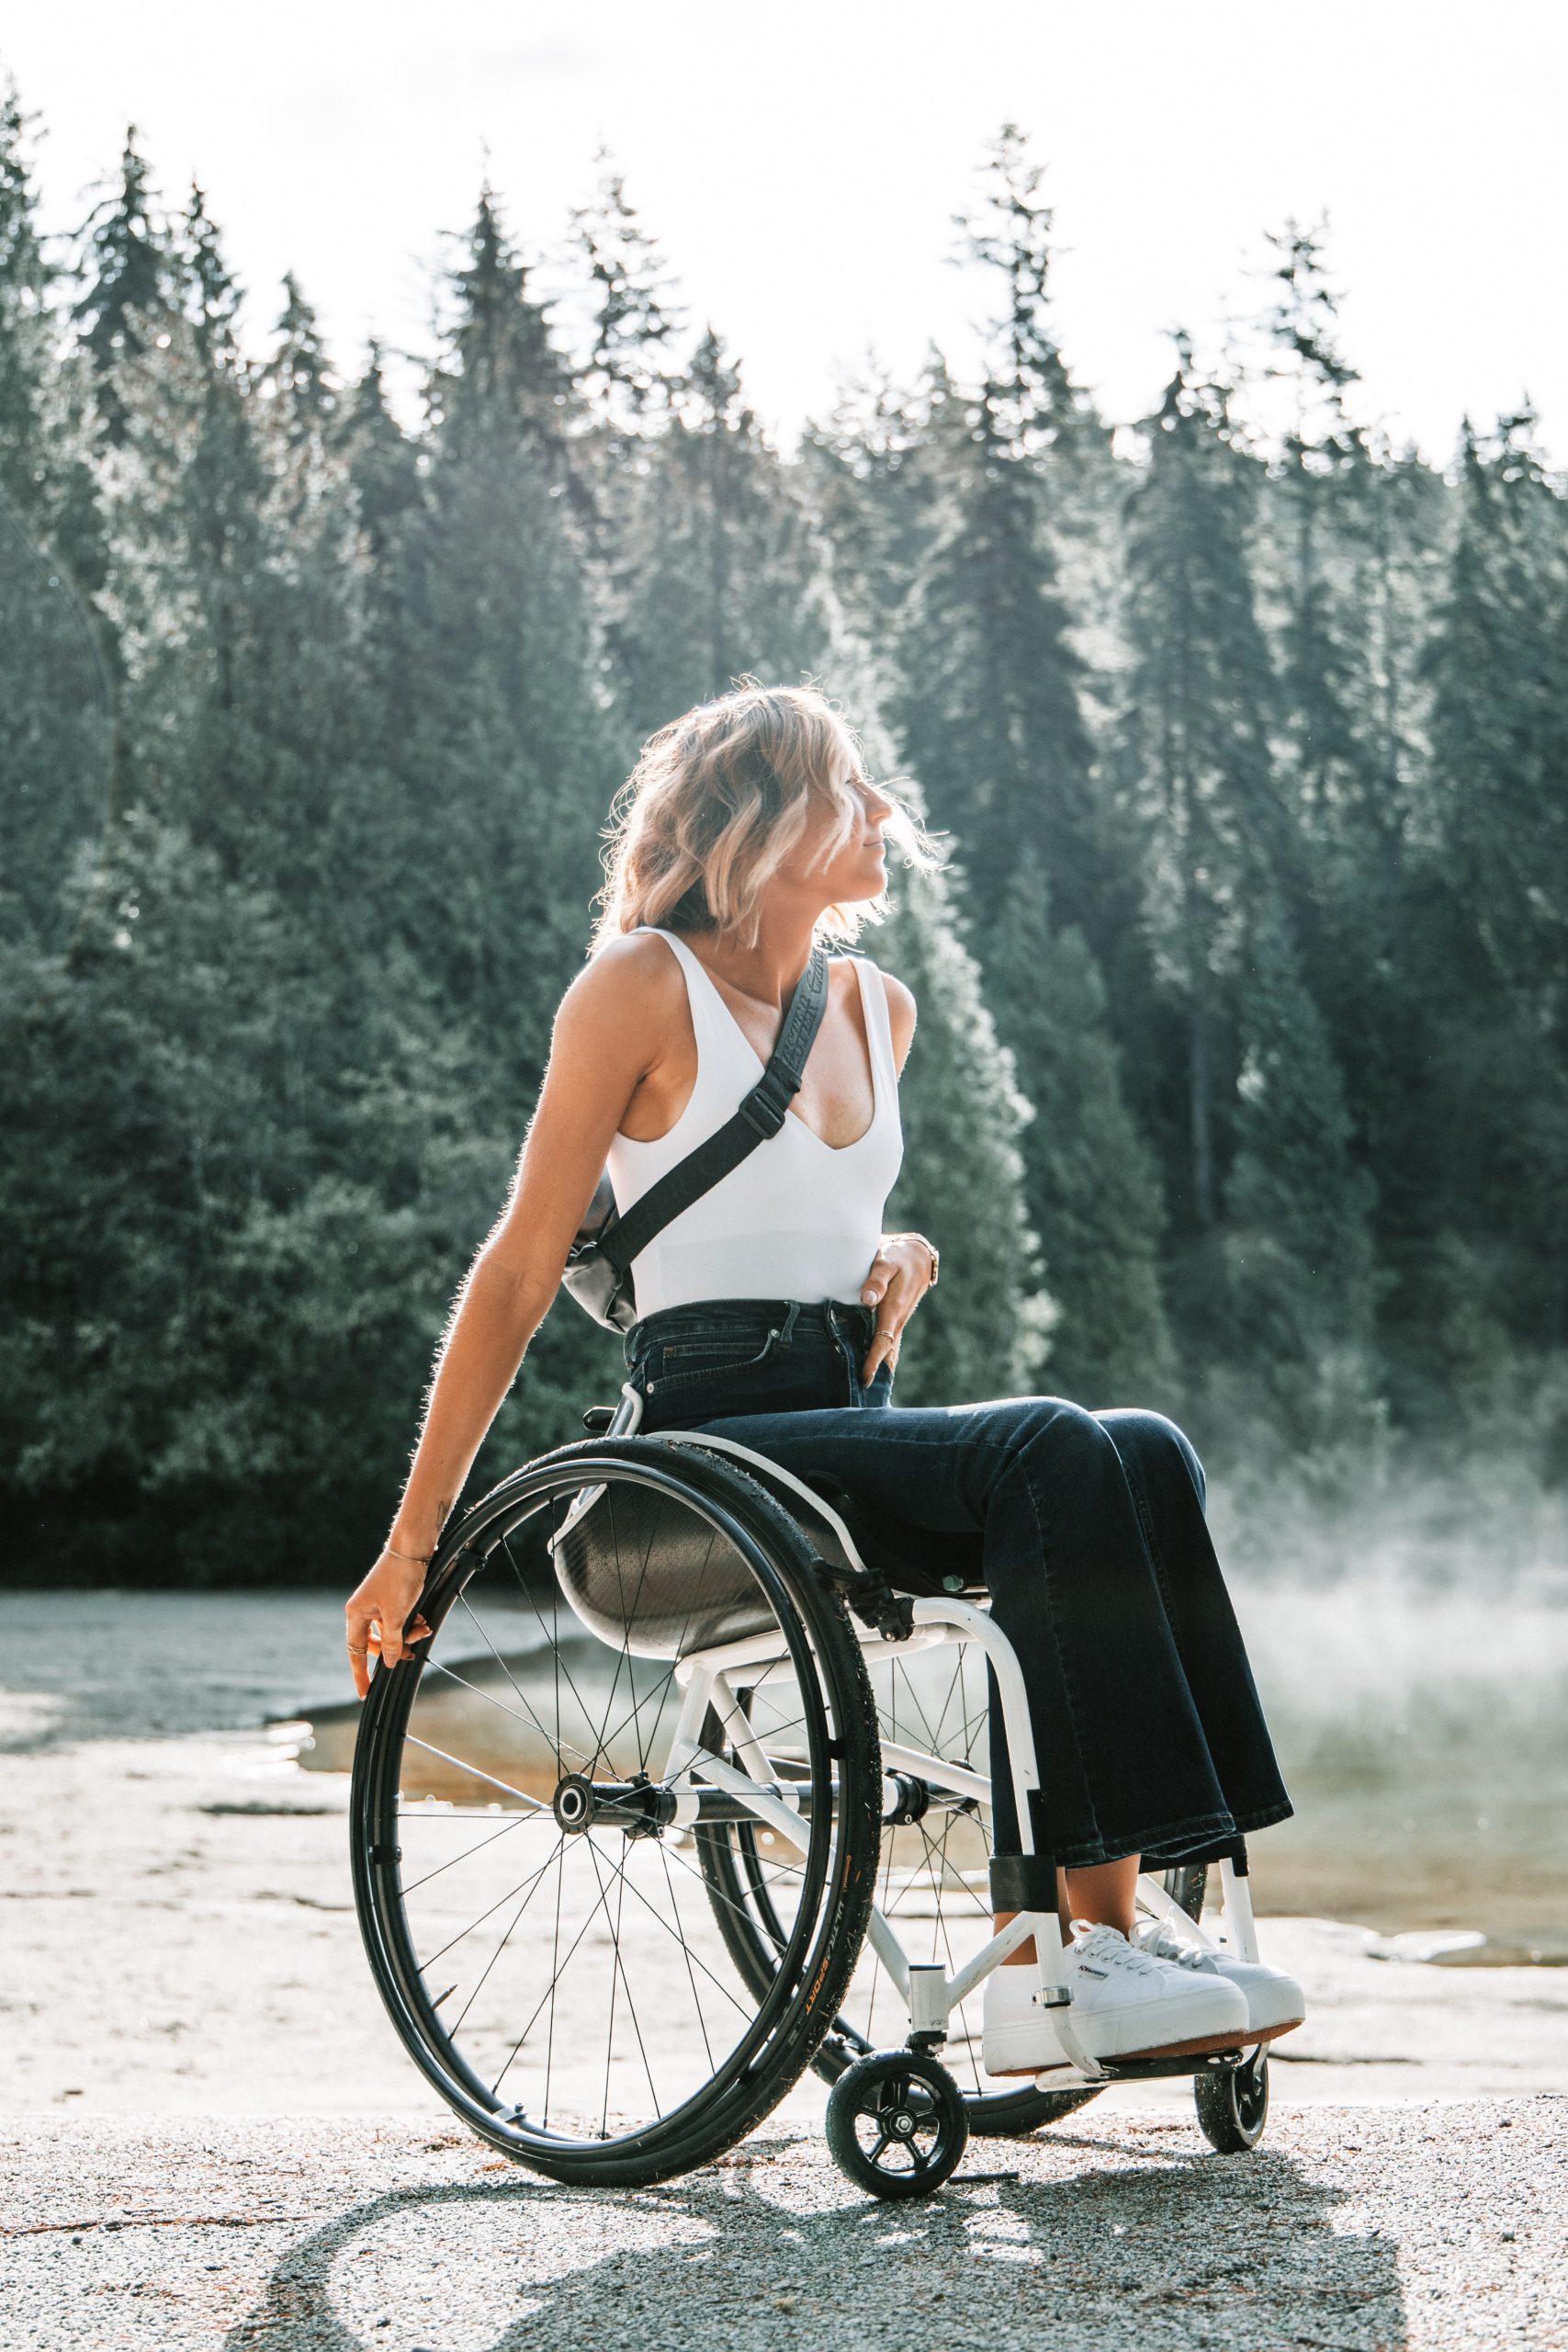 Adaptive Clothing Brands for Women 2021 - Trend-Able